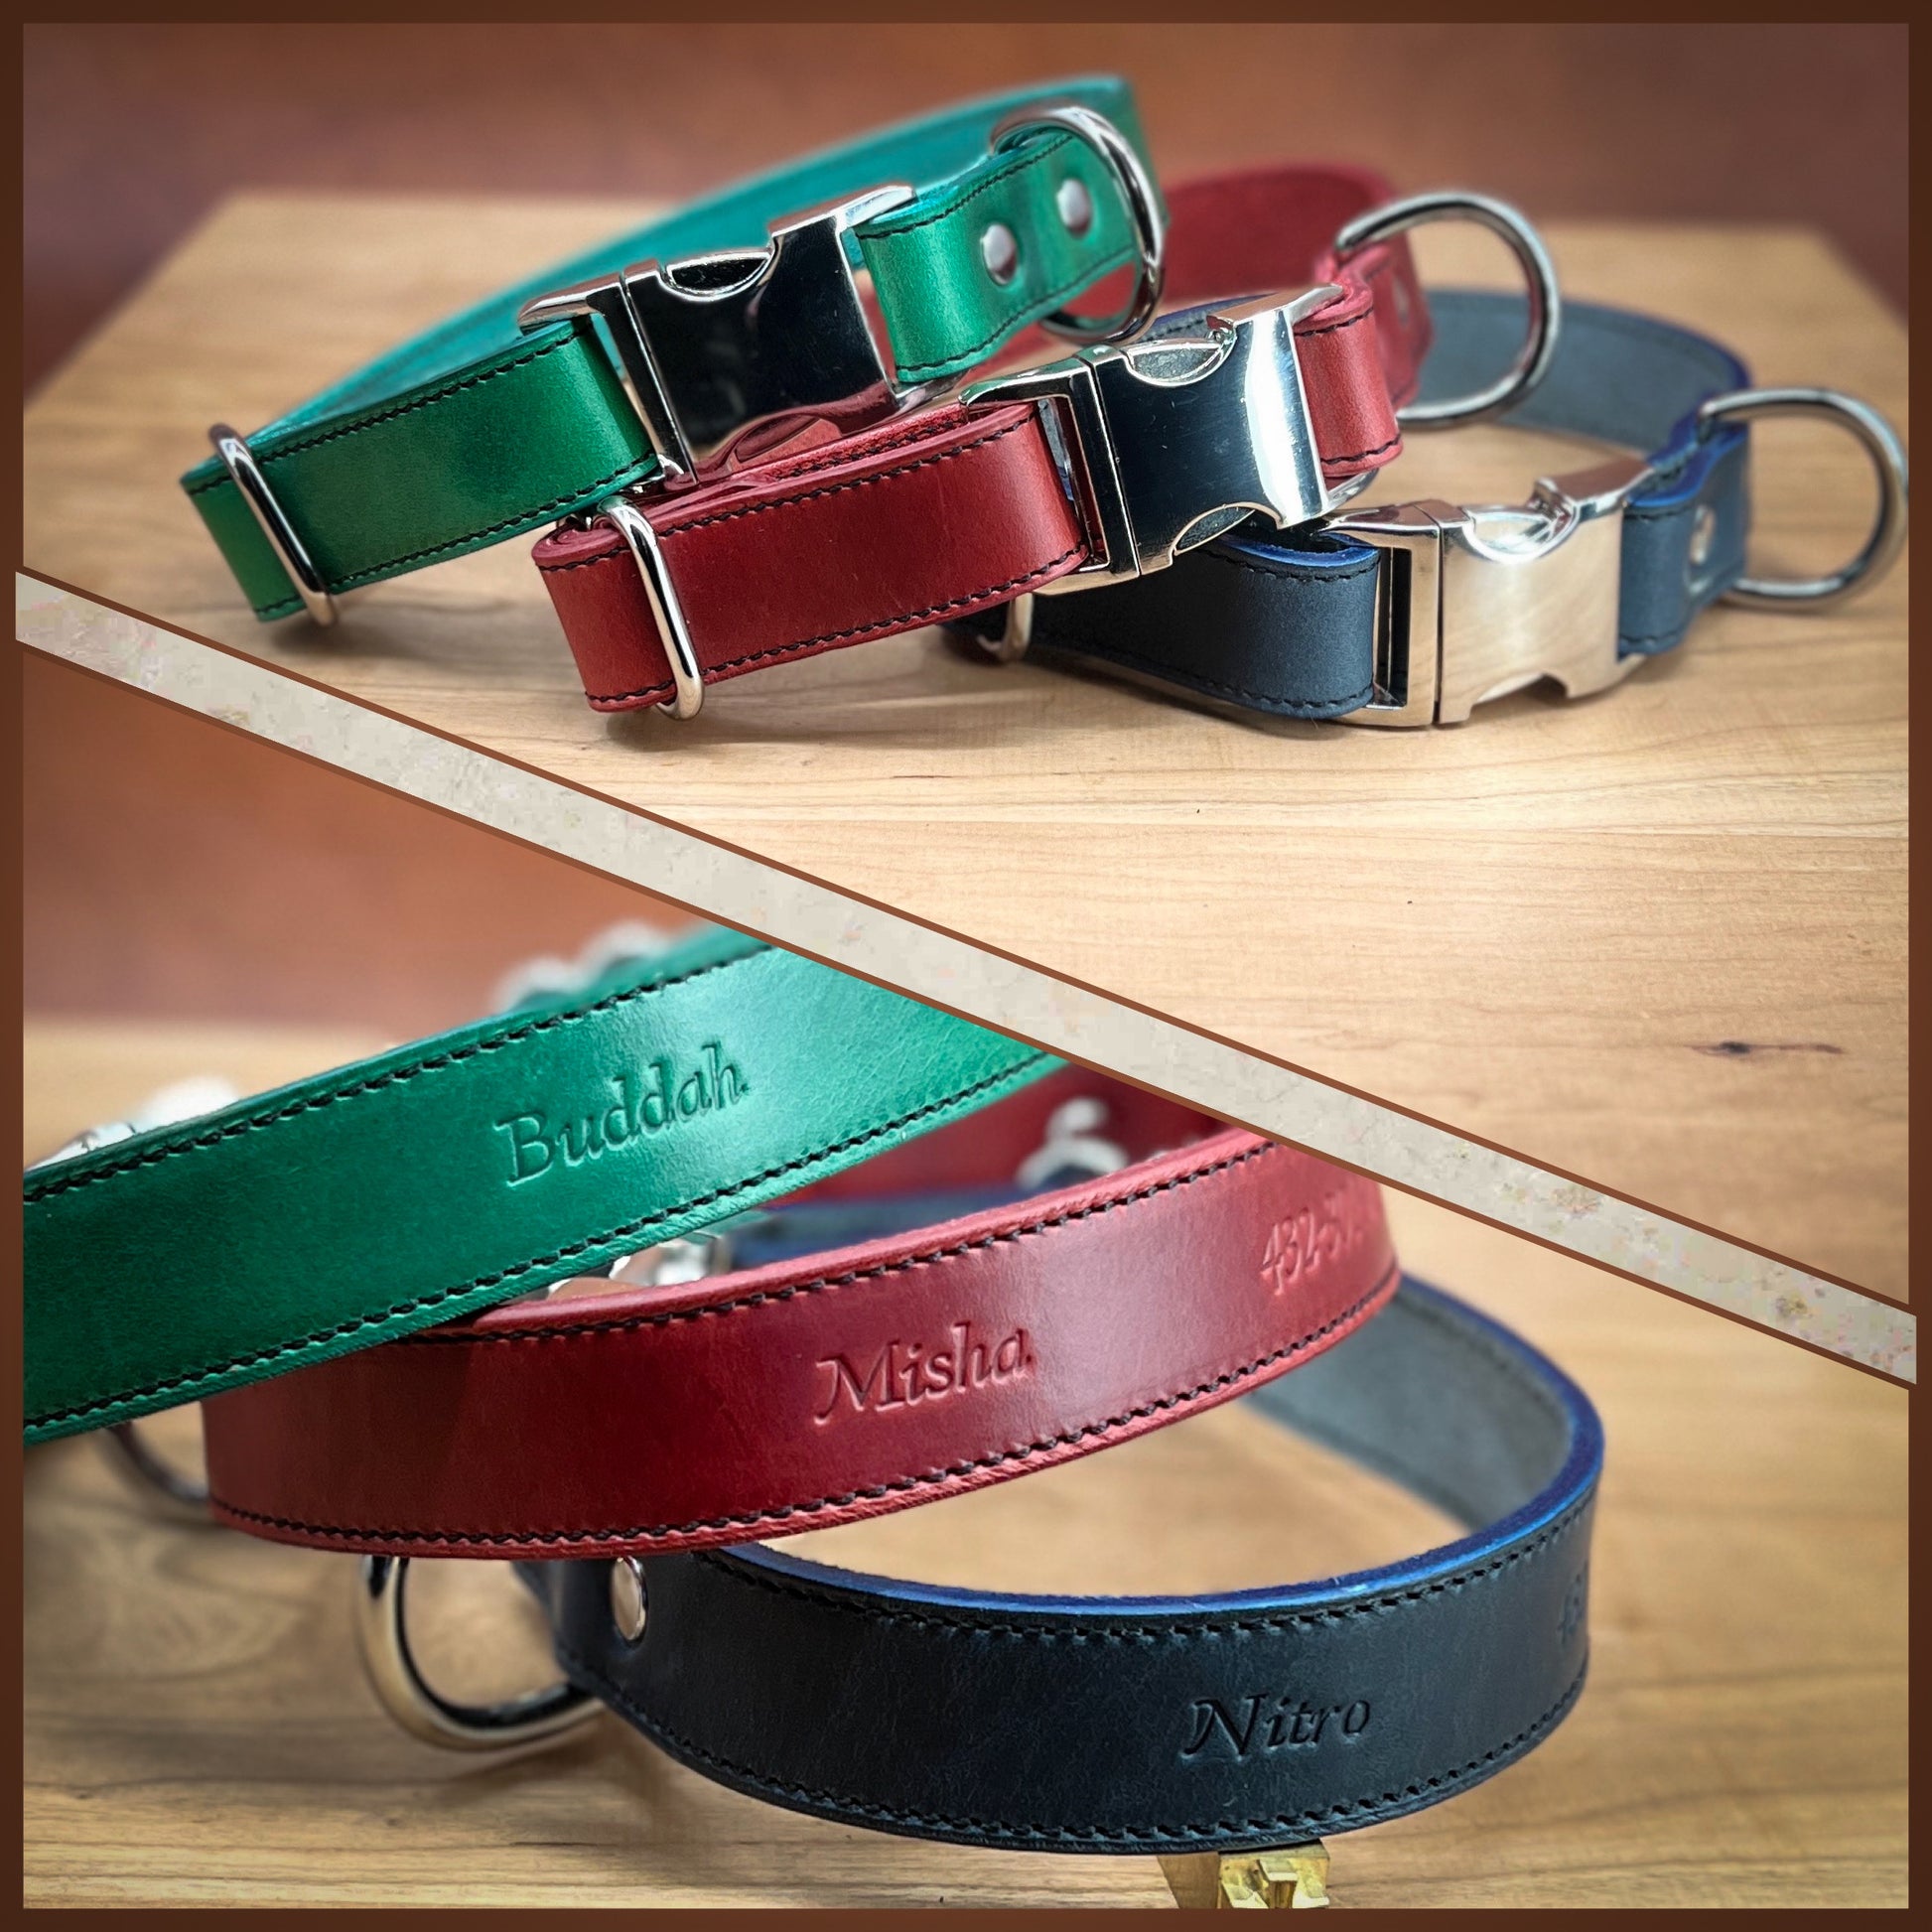 Cute & Super Safe Hardware Buckle Collar with Name for Dogs